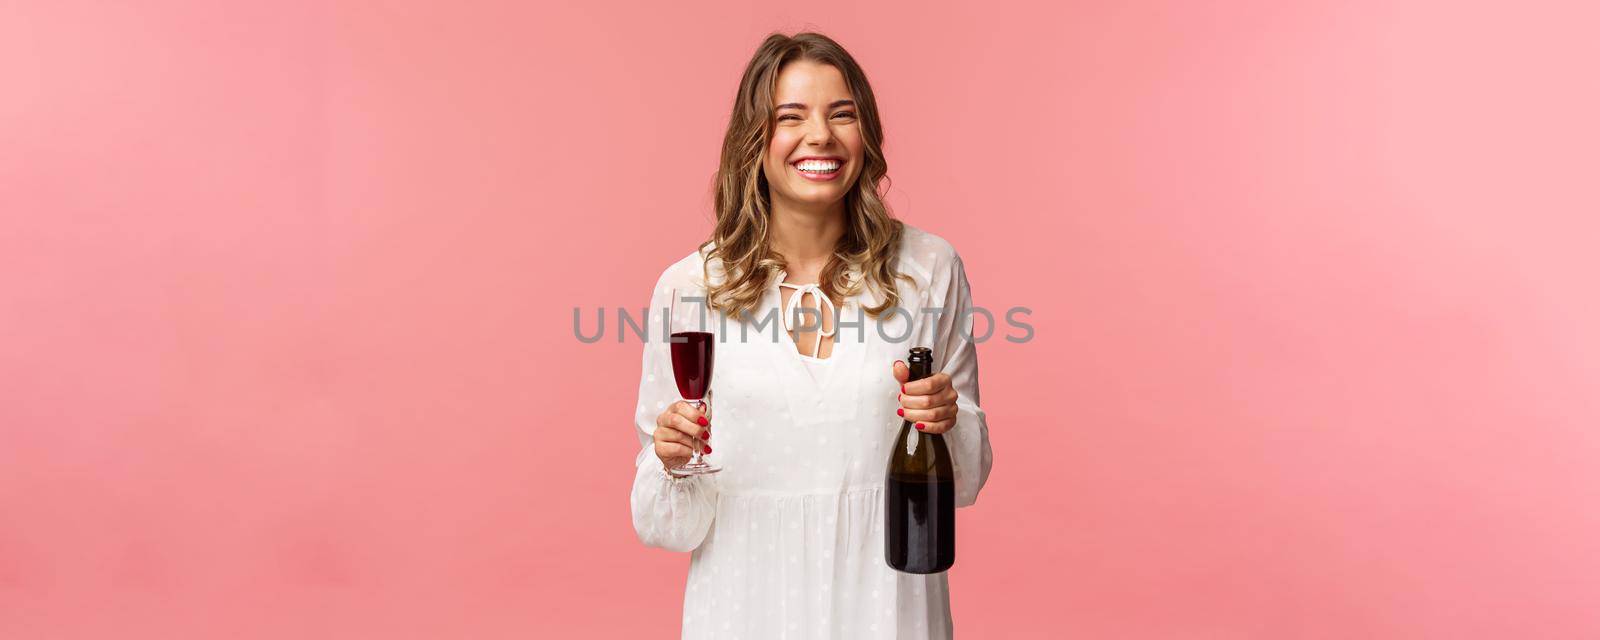 Holidays, spring and party concept. Portrait of happy and carefree european blond female celebrating in white dress, holding bottle champagne or wine, drinking from glass and laughing.